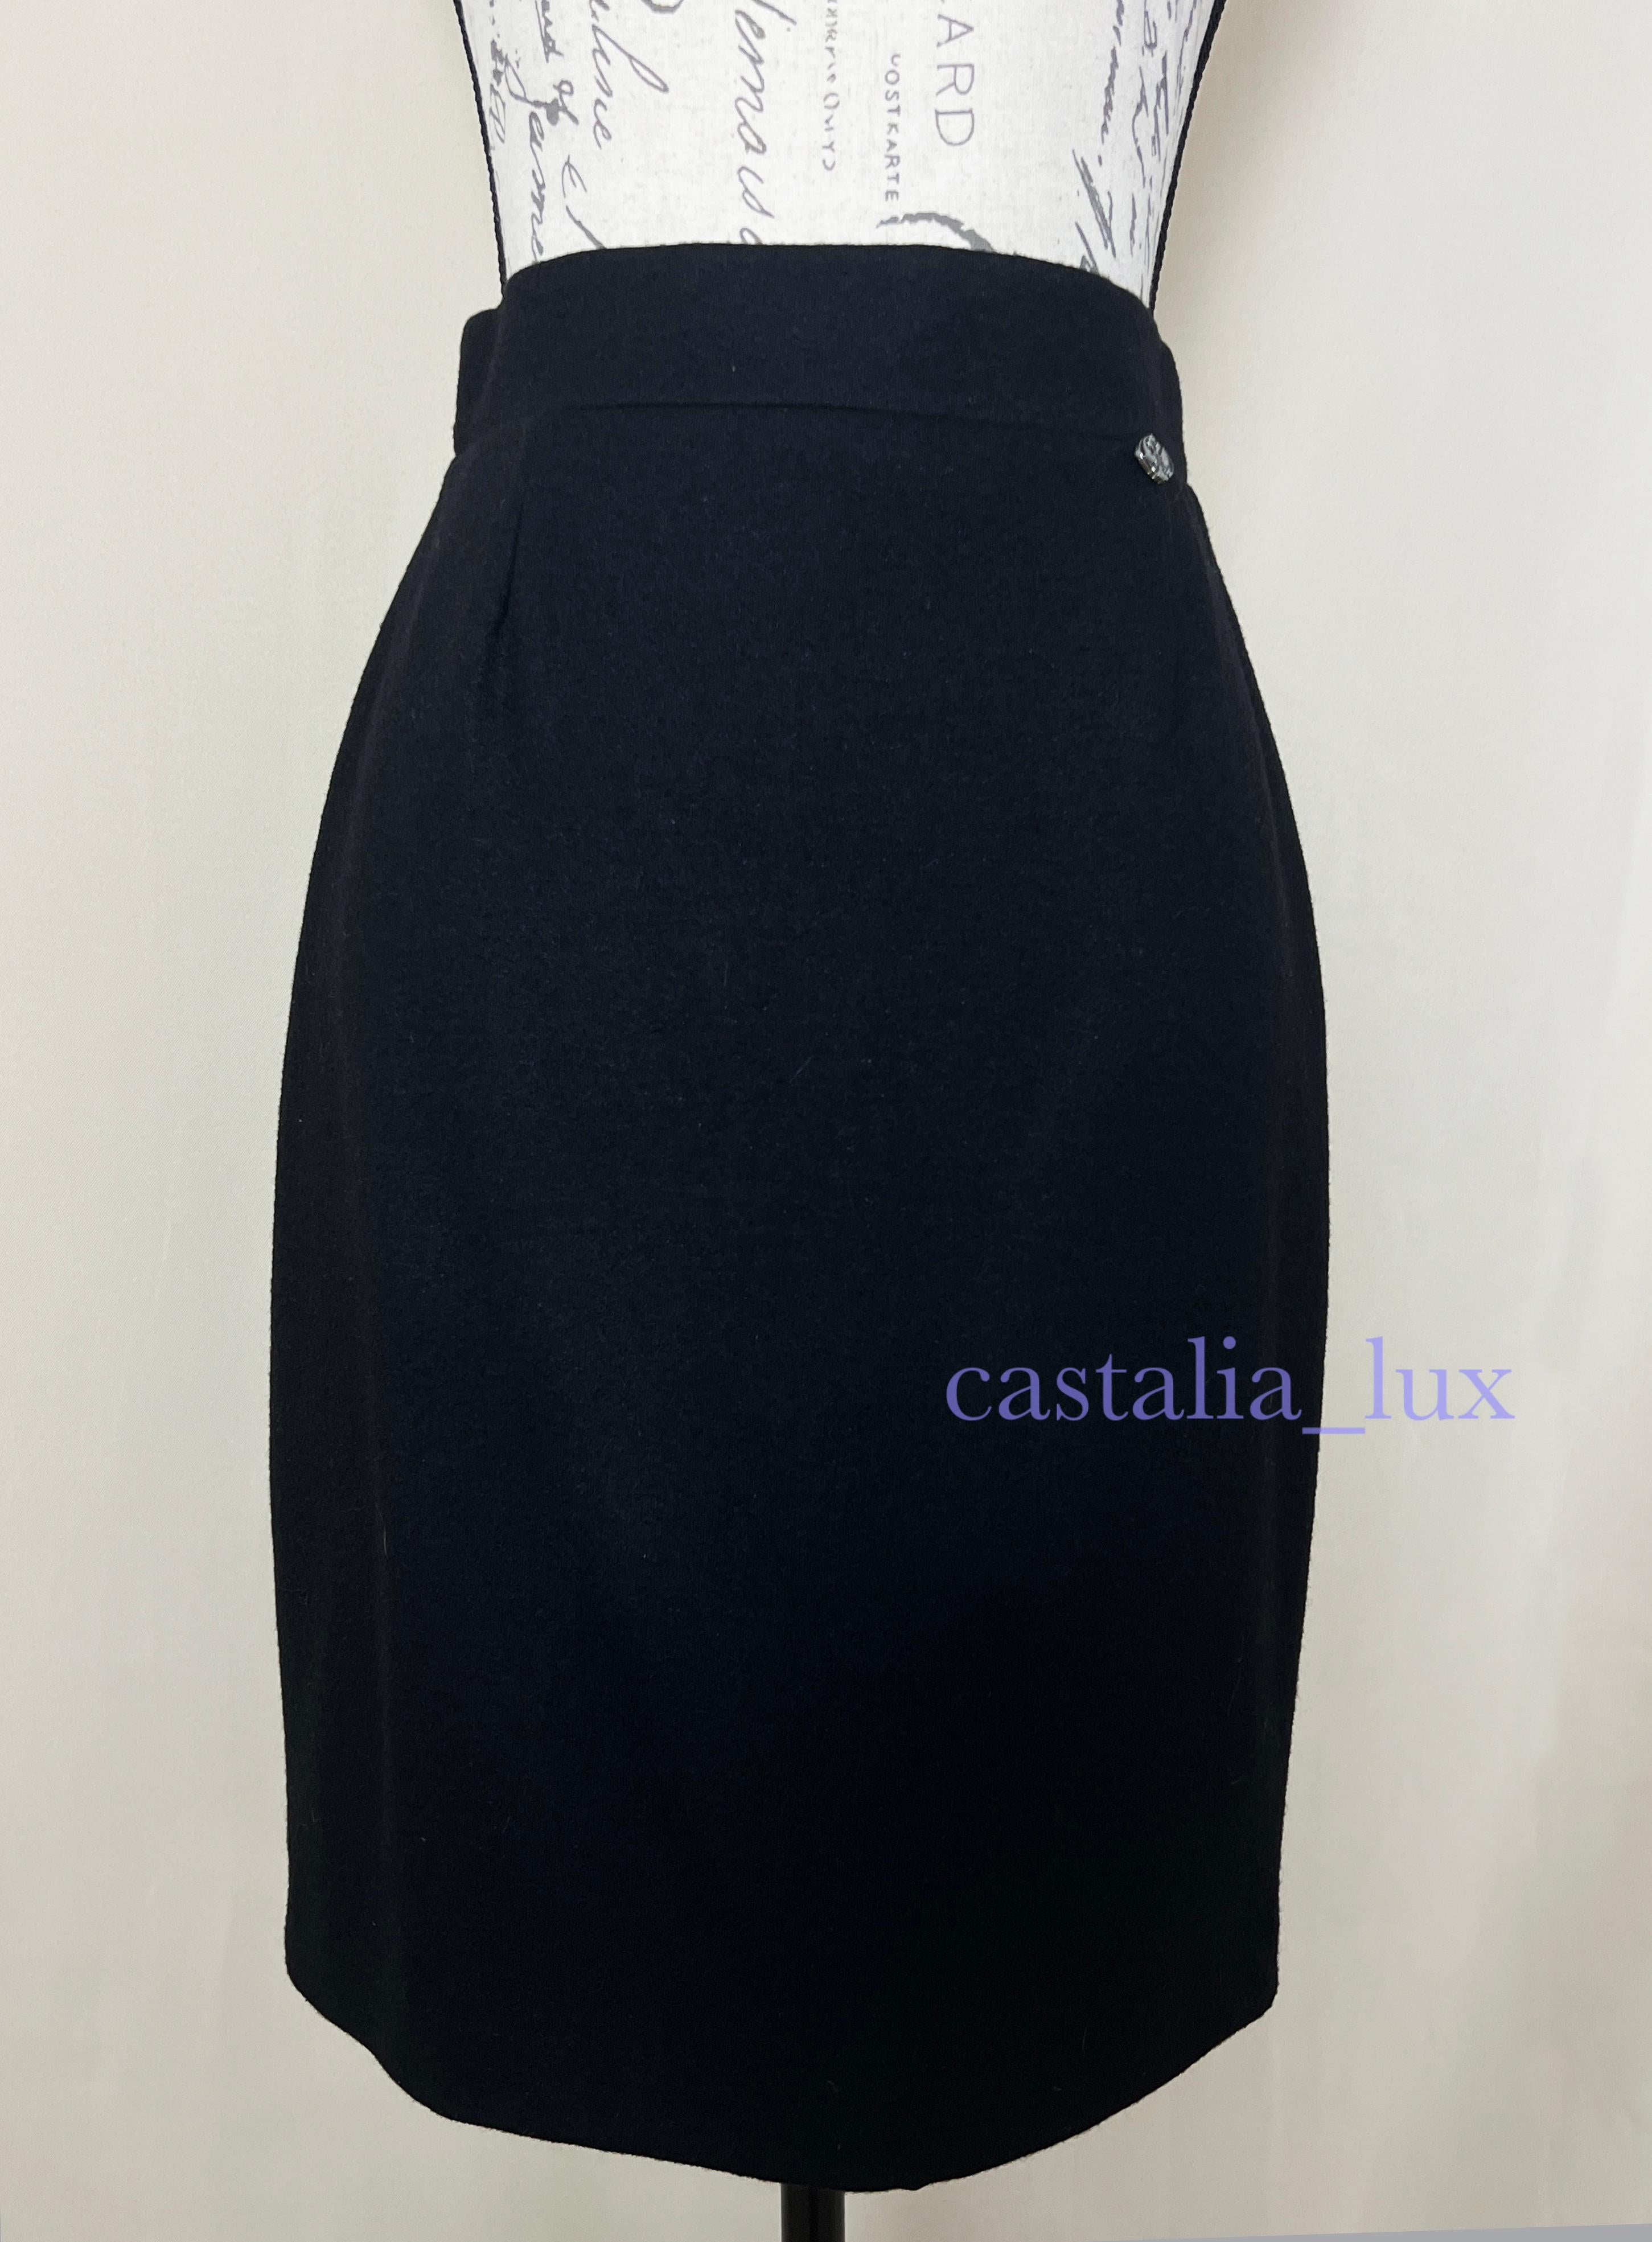 Chanel New Eagle Charm Black Pencil Skirt For Sale 7